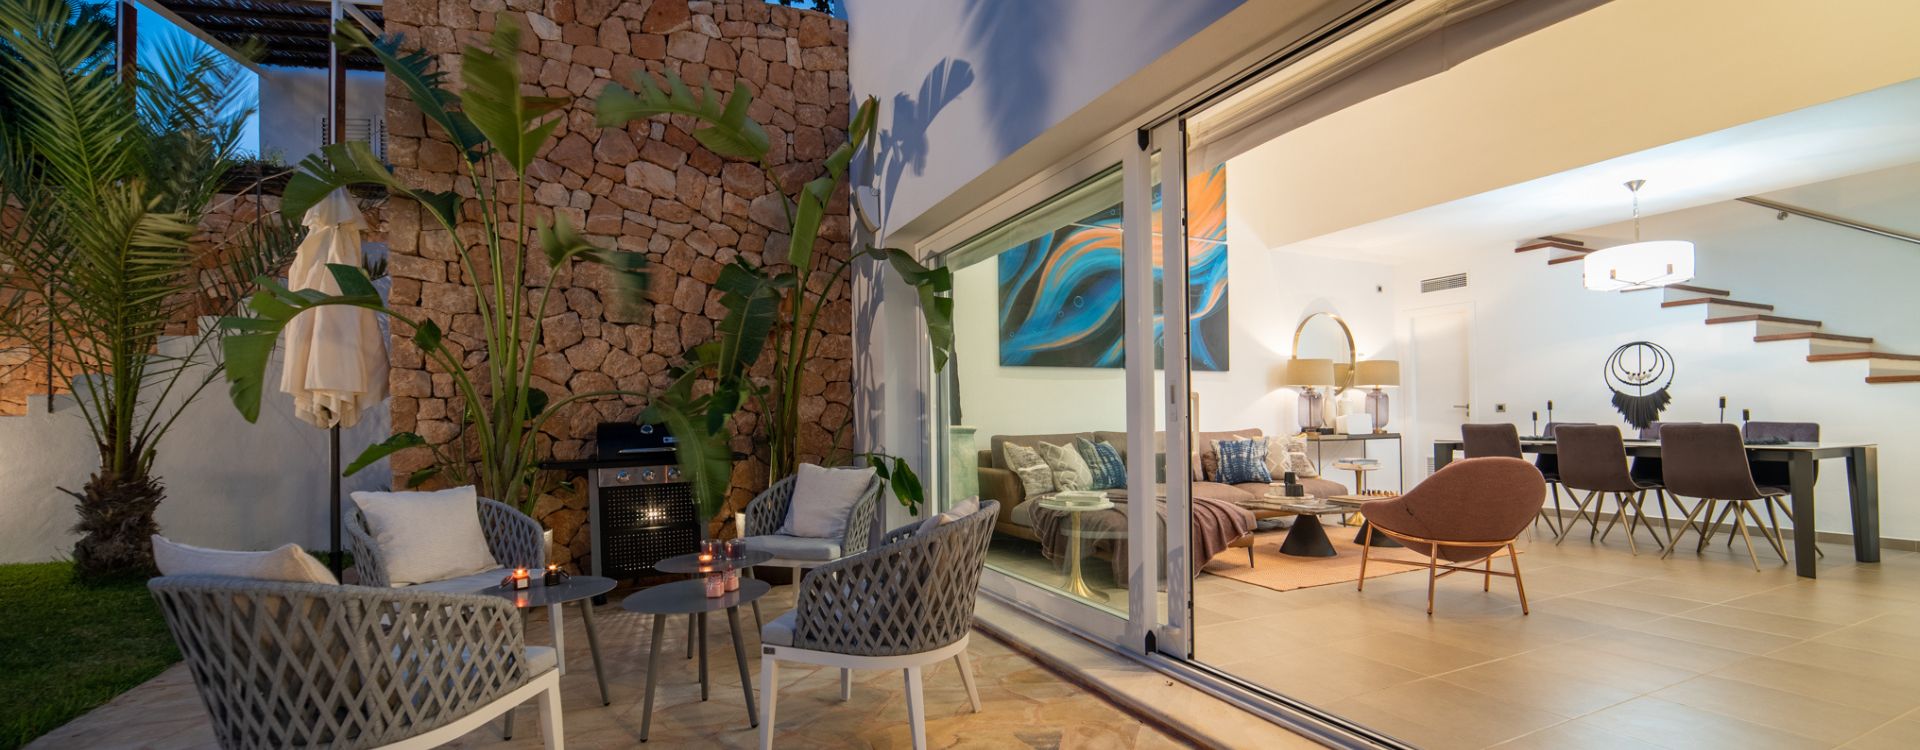 Villa Natalie to rent in Cap Martinet in Ibiza with outside lounge area. 